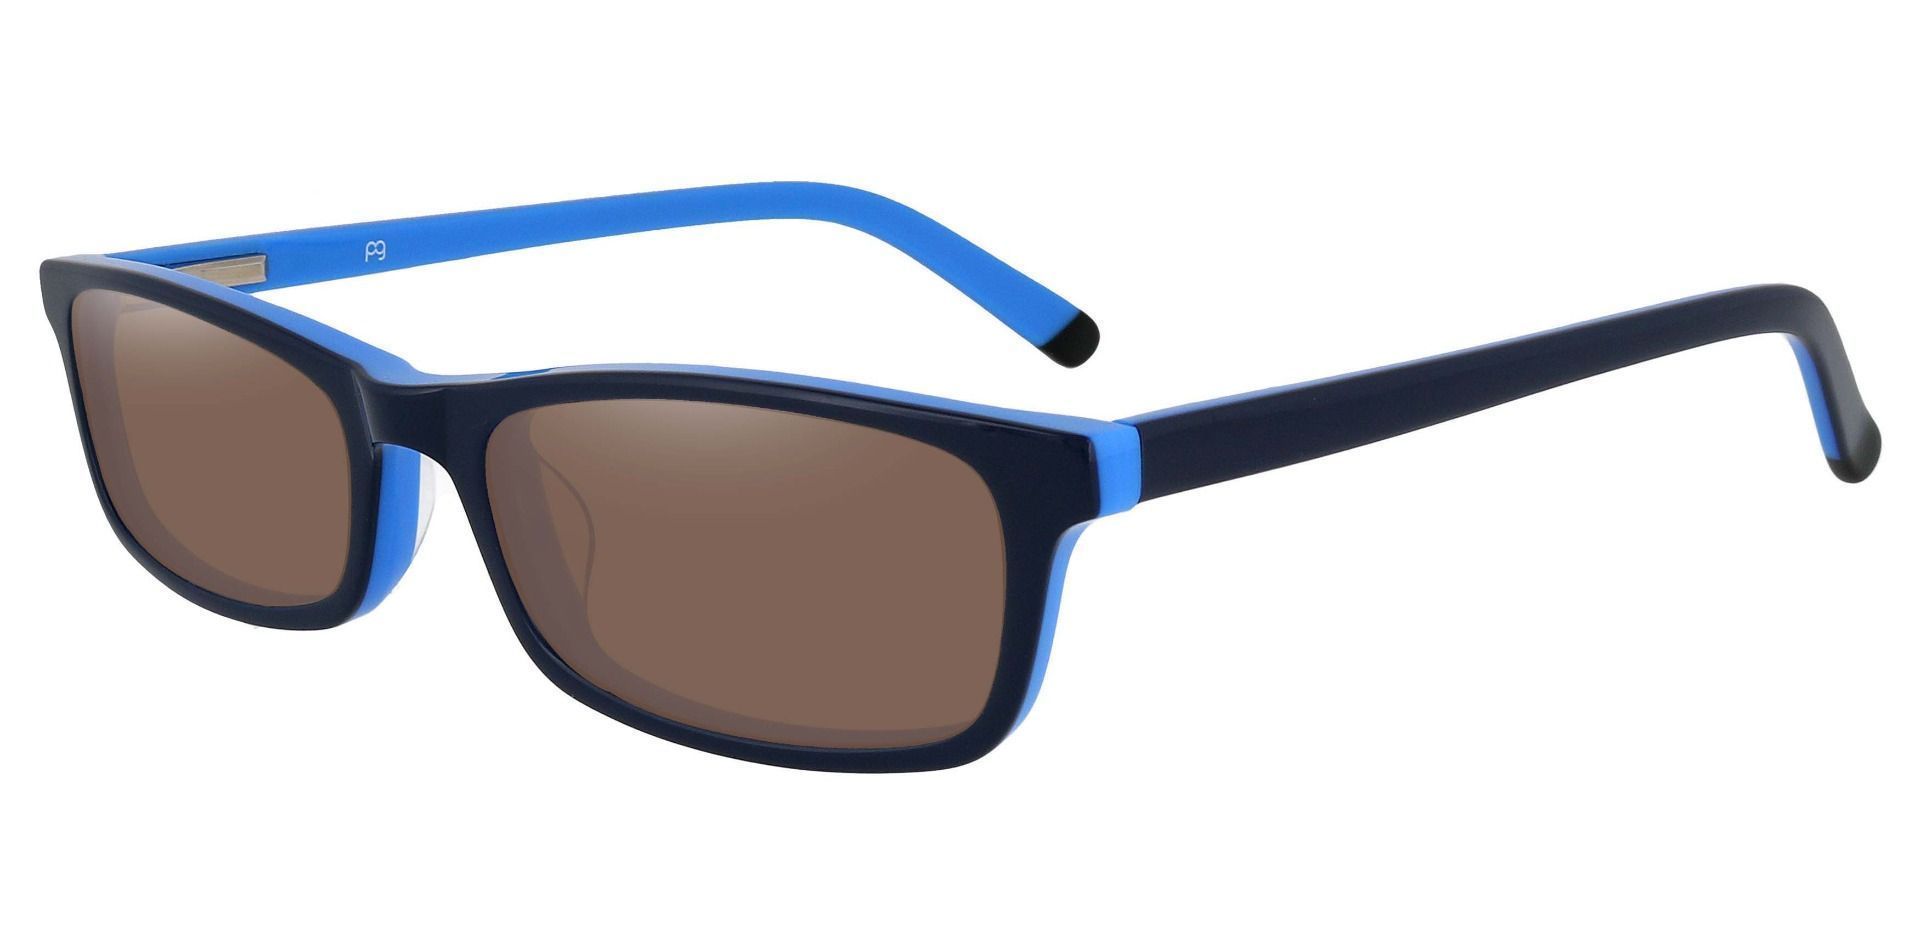 Palisades Rectangle Single Vision Sunglasses - Blue Frame With Brown Lenses